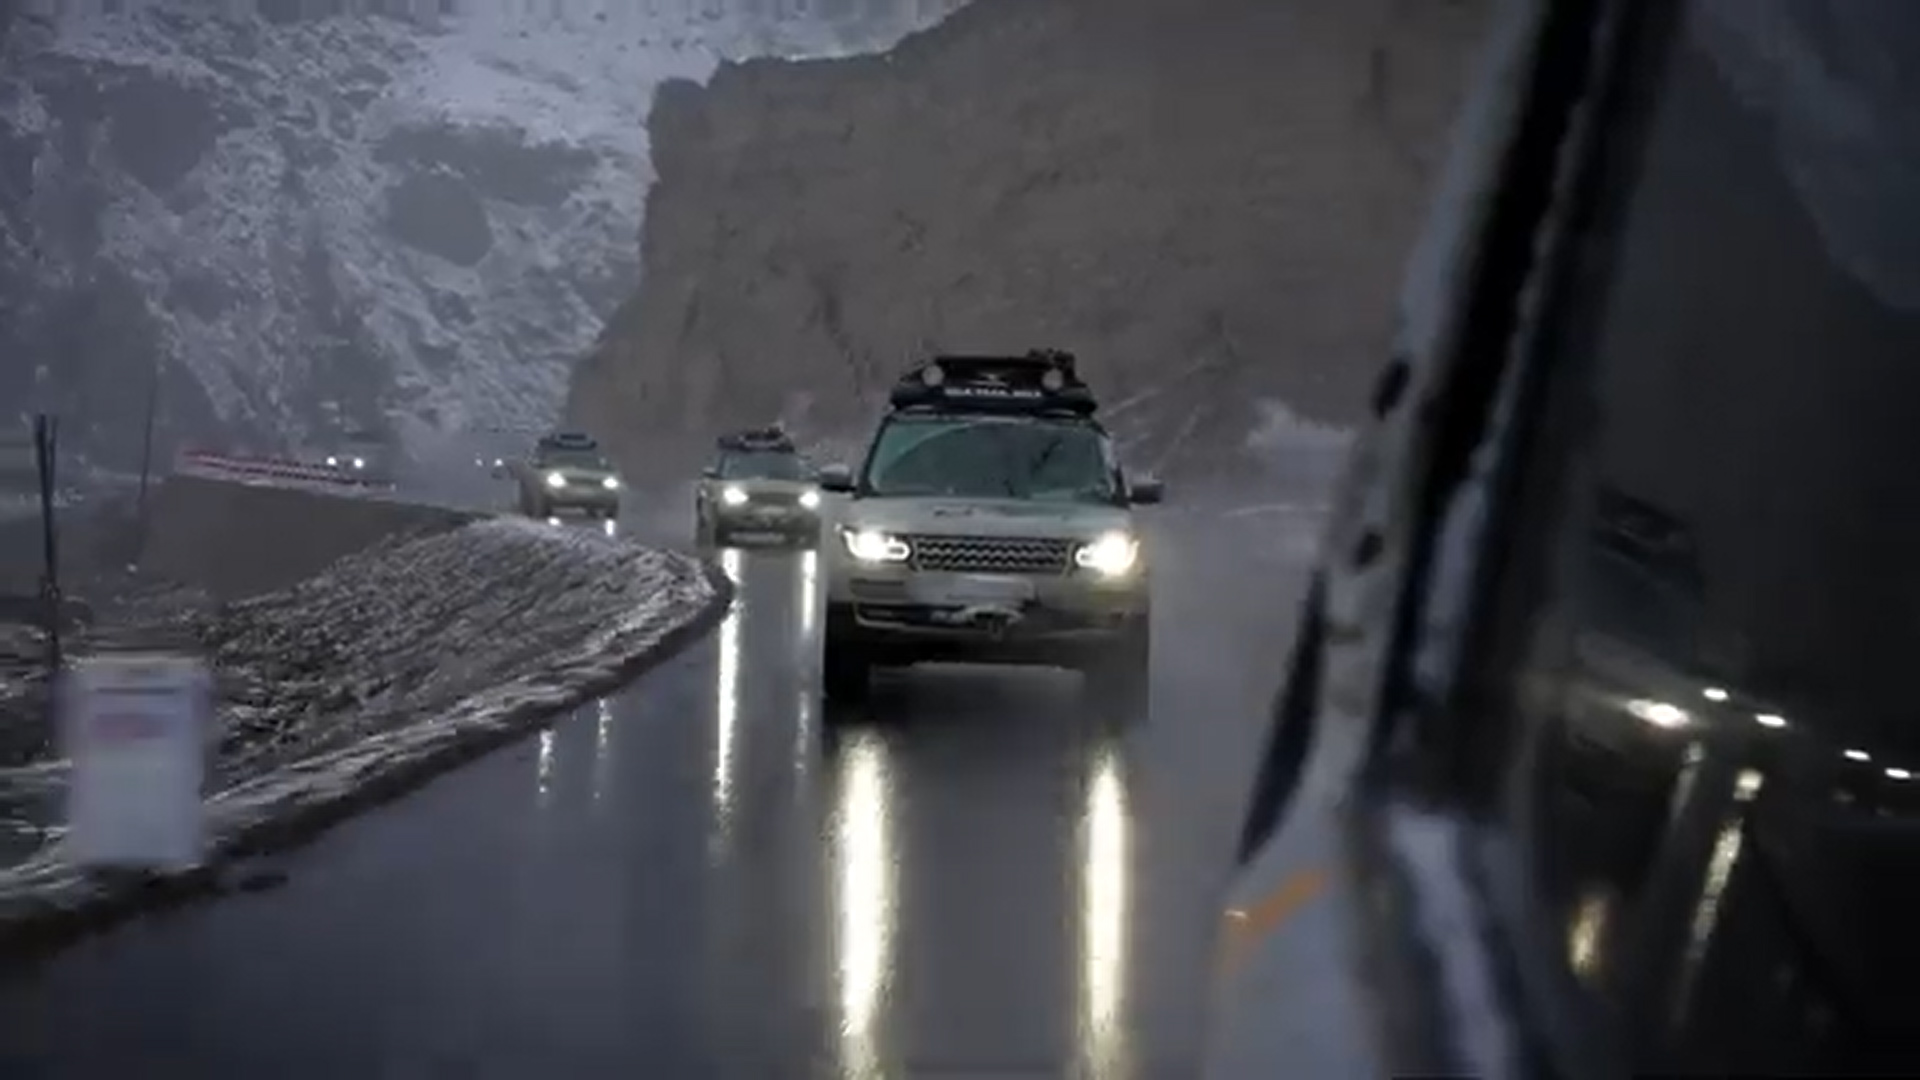 A Land Rover defender on an expedition in snow